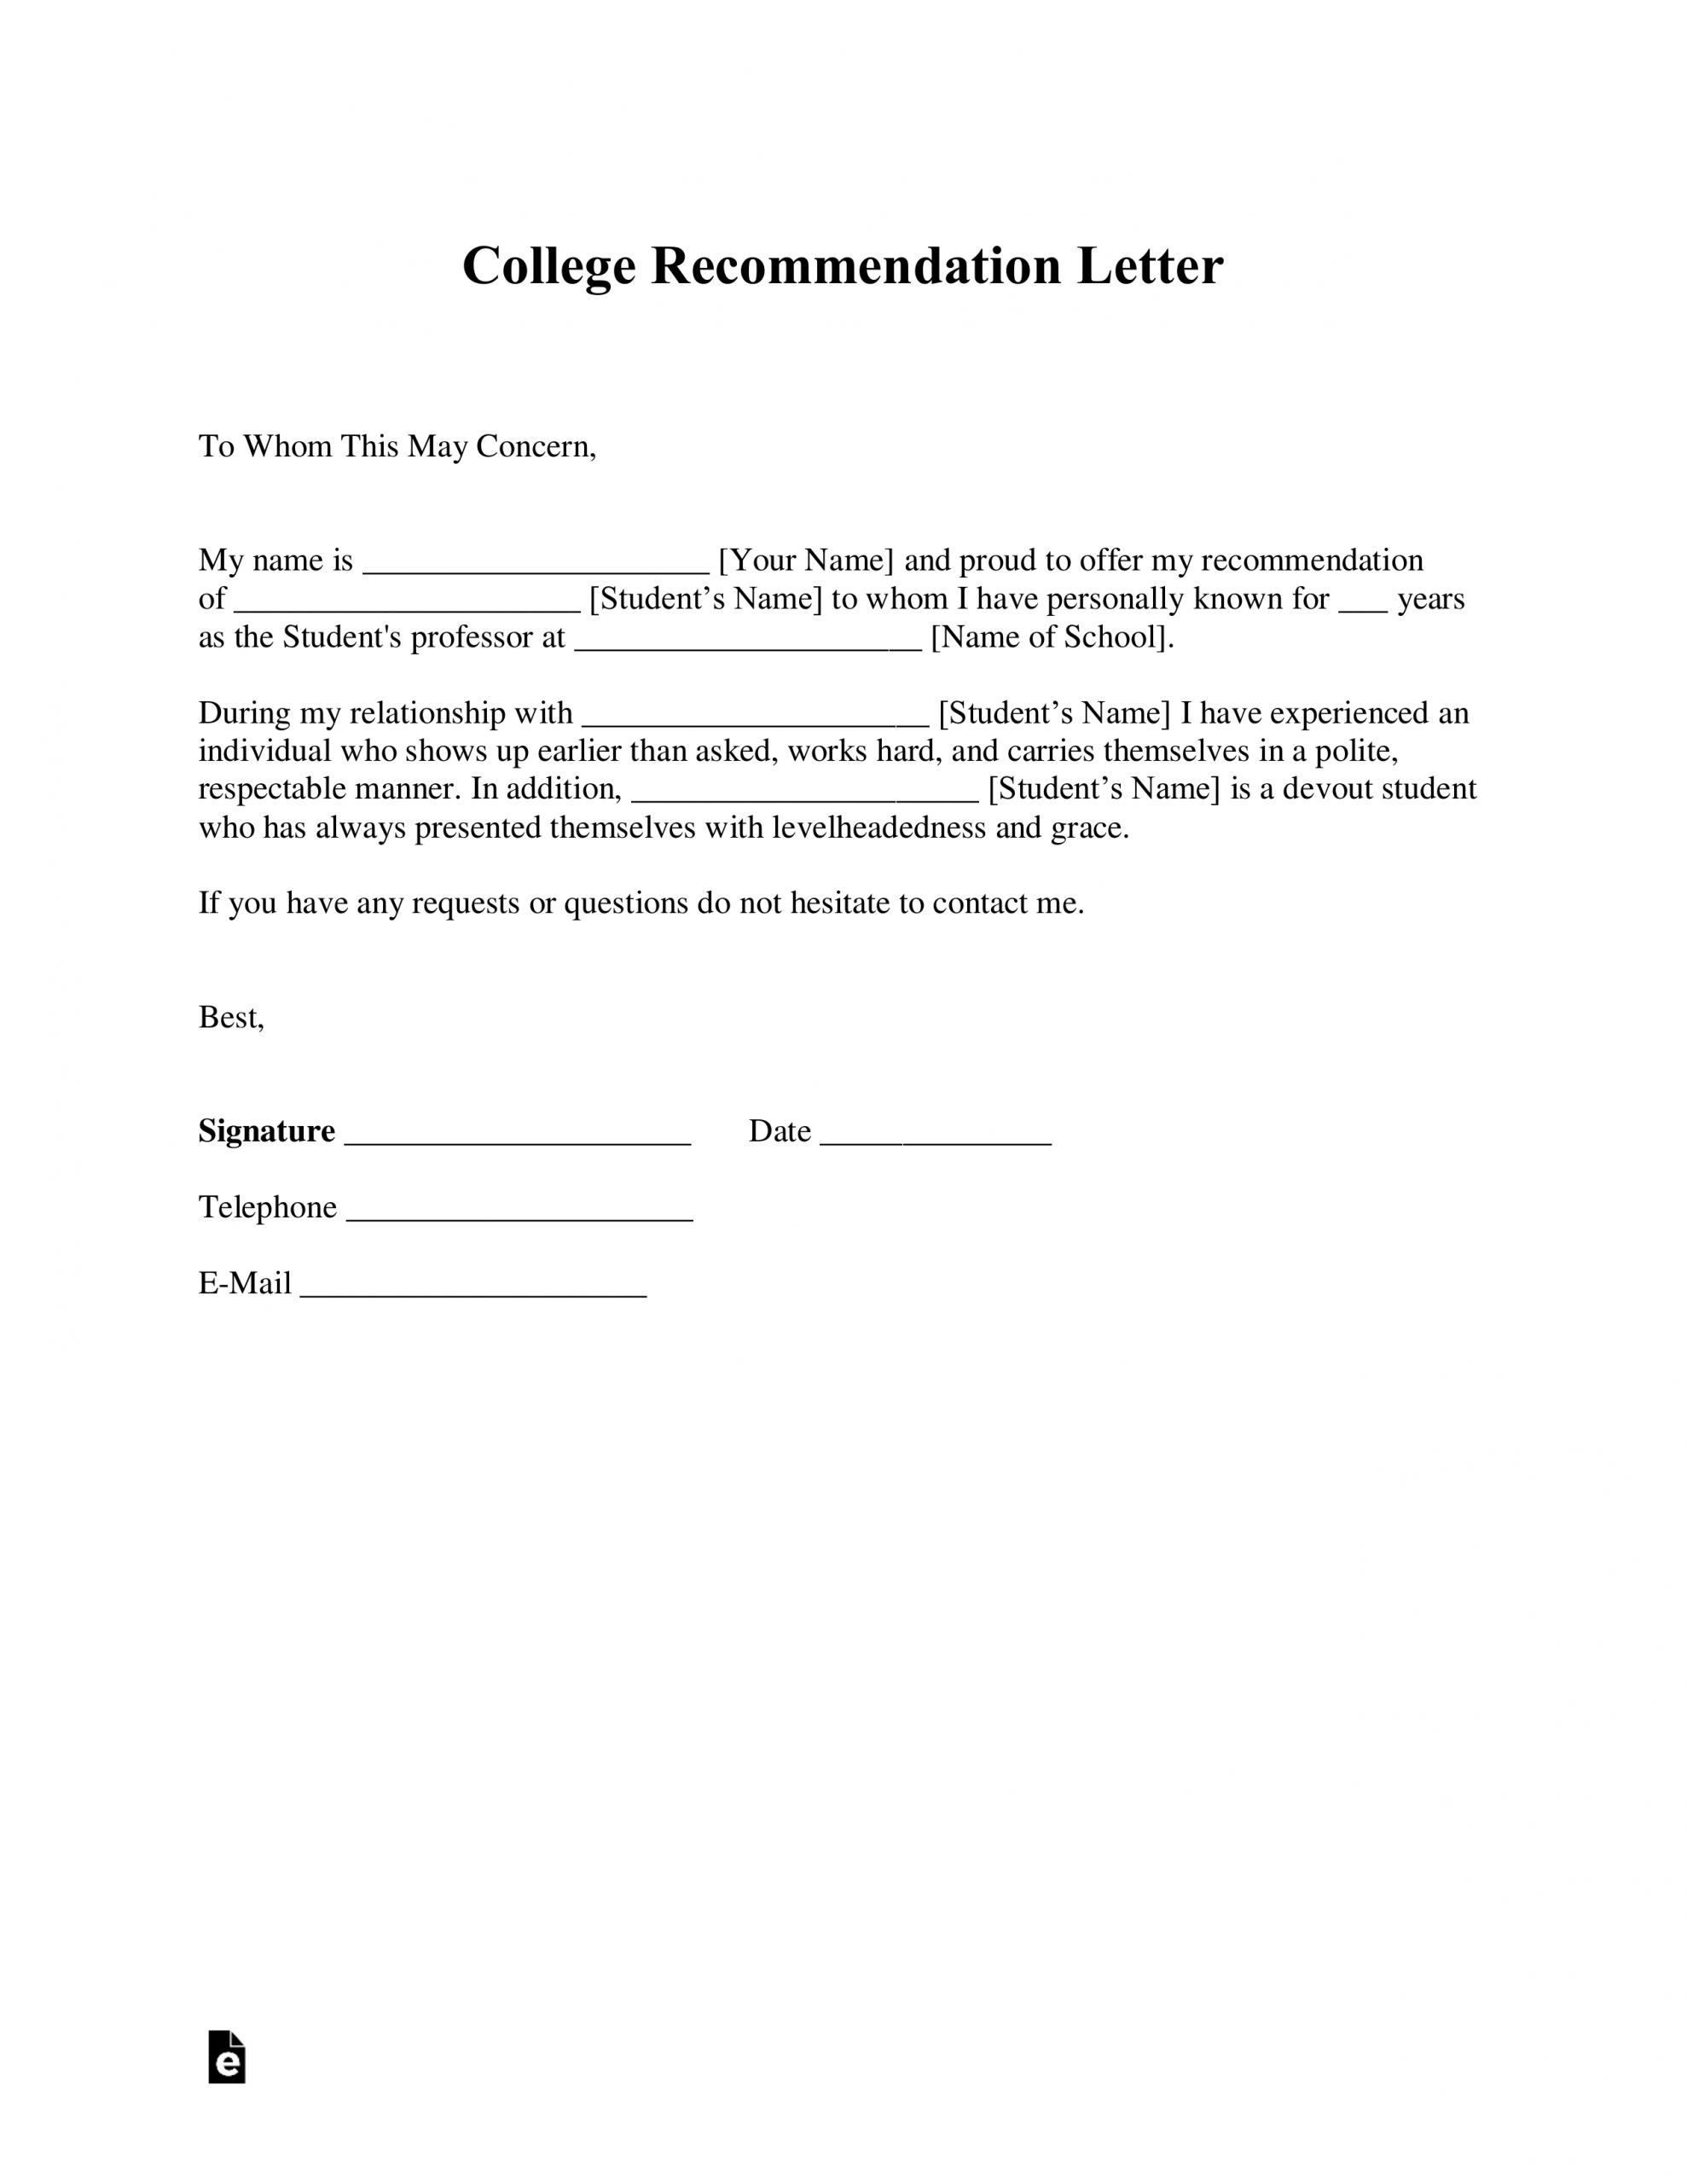 Free College Recommendation Letter Template With Samples intended for dimensions 2550 X 3301